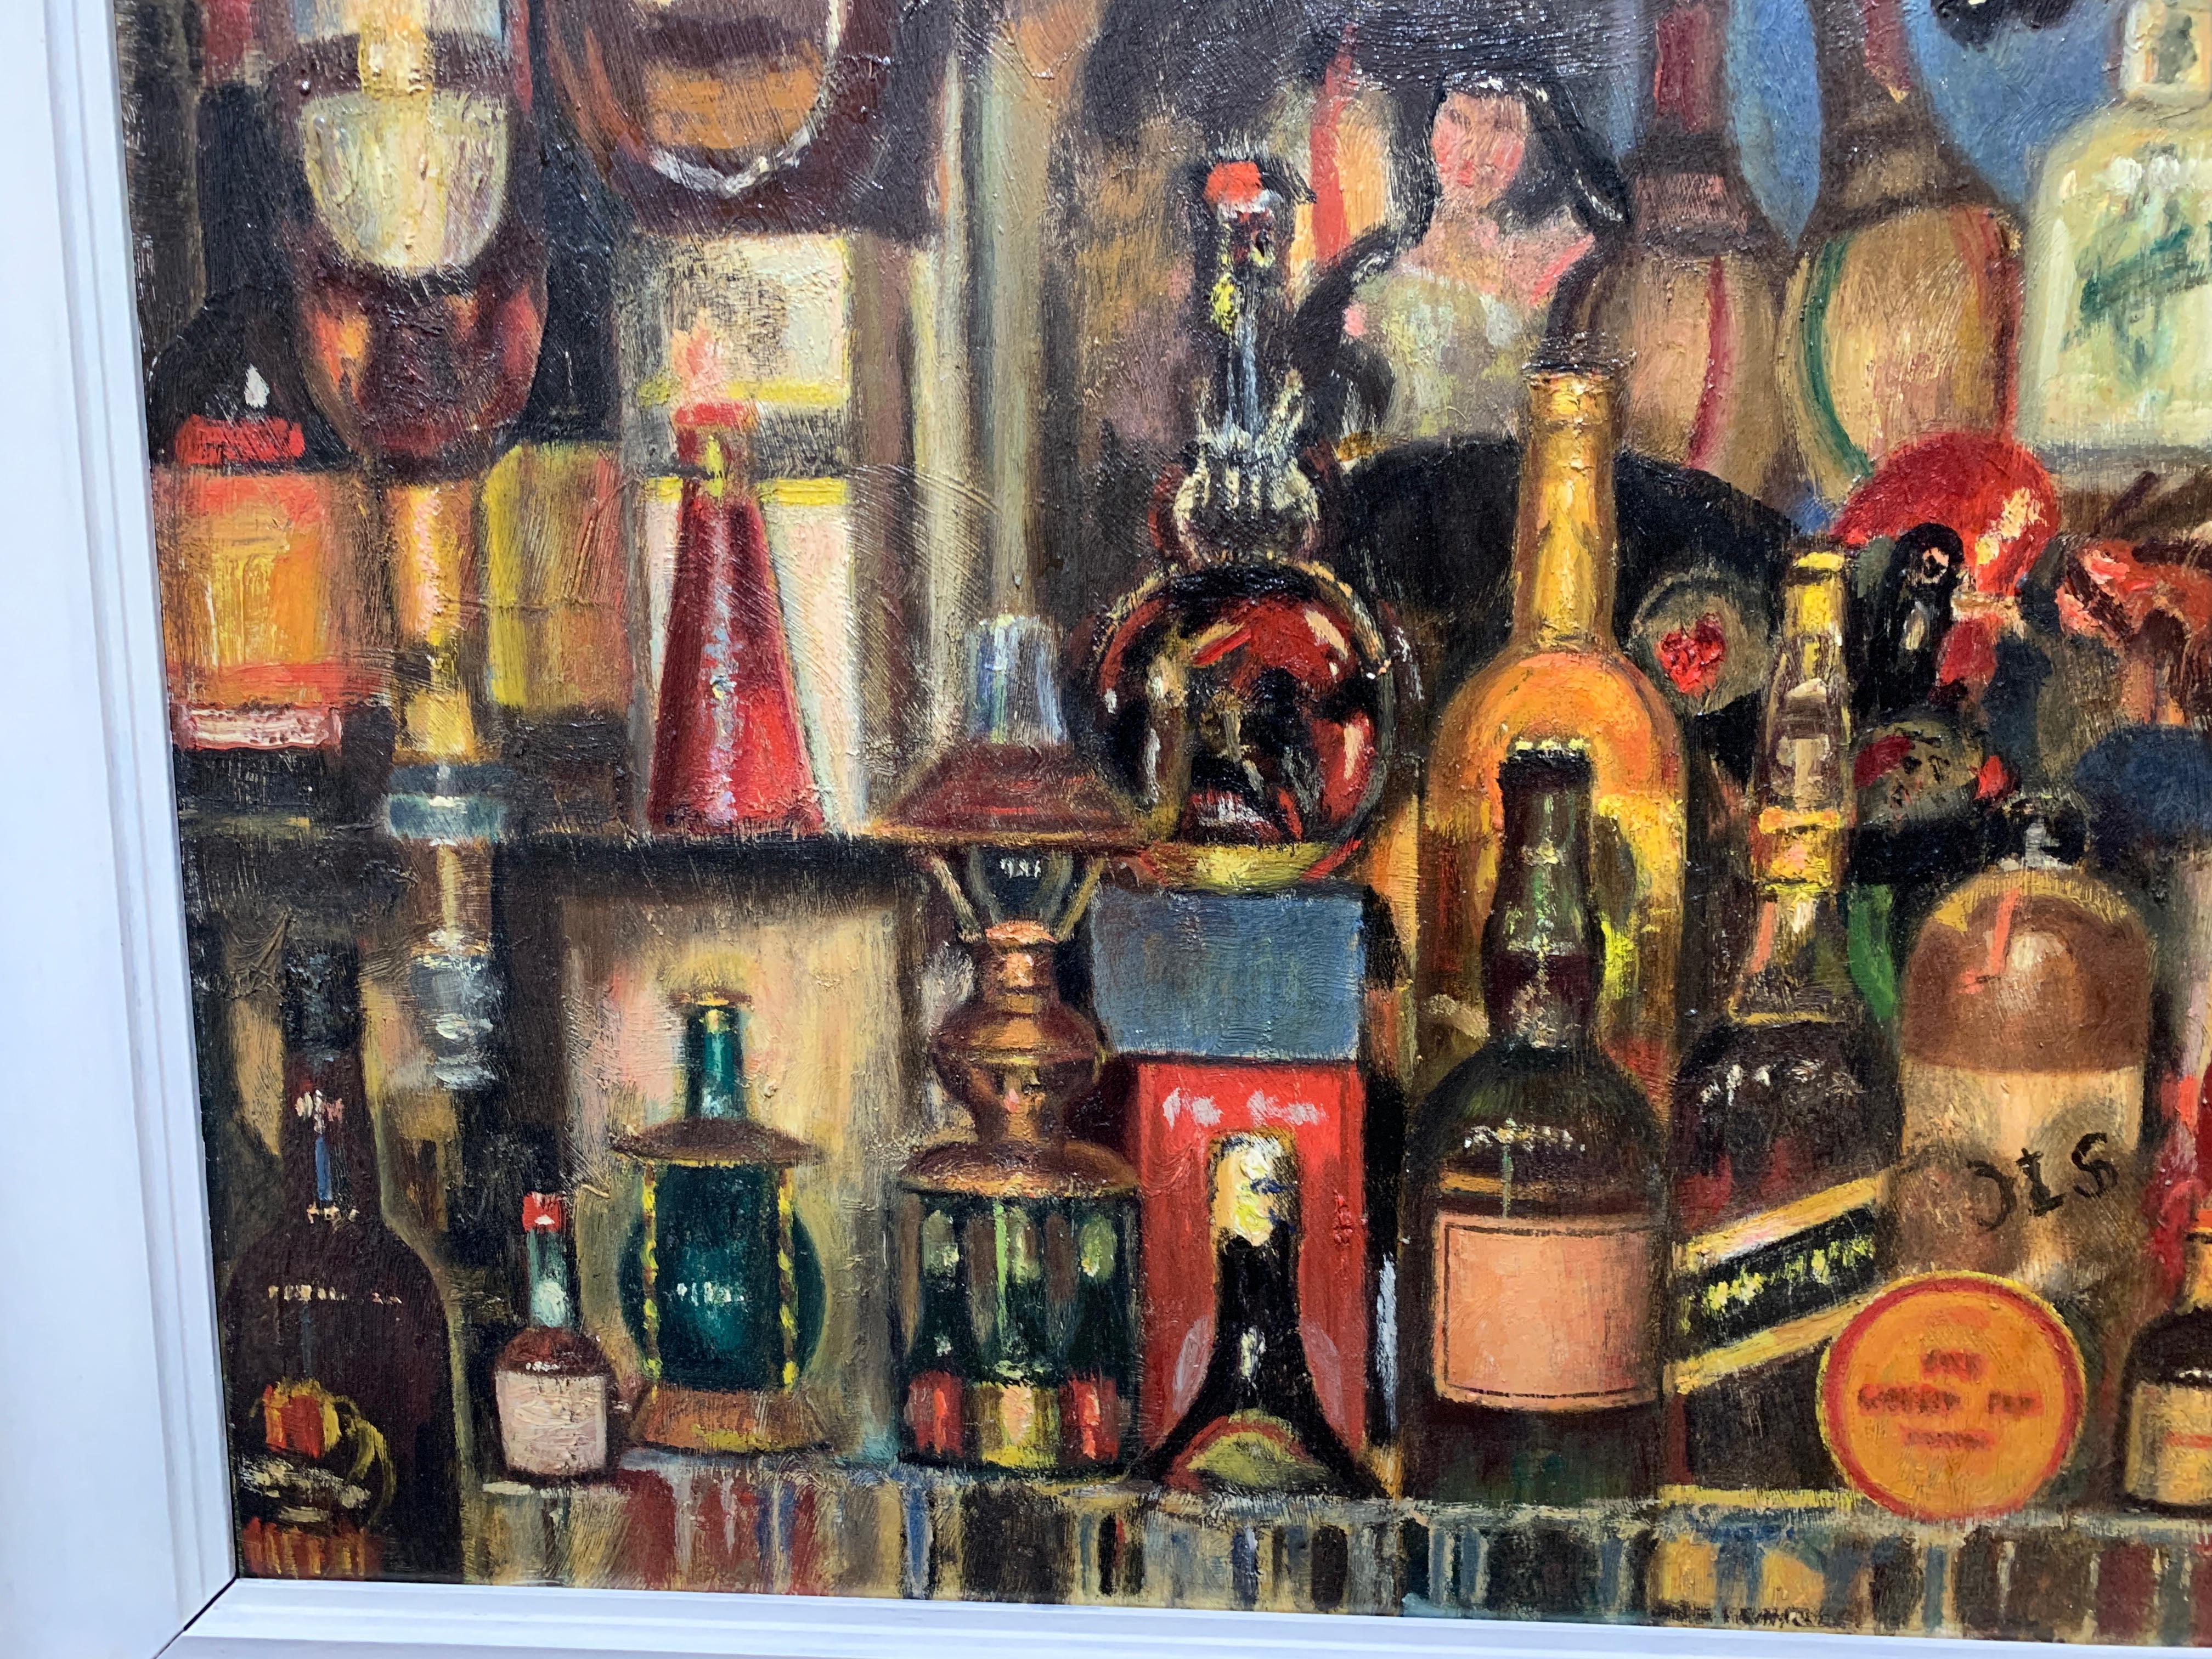 English  1960's mid century modern bar of bottles of alcohol in a pub/bar 1